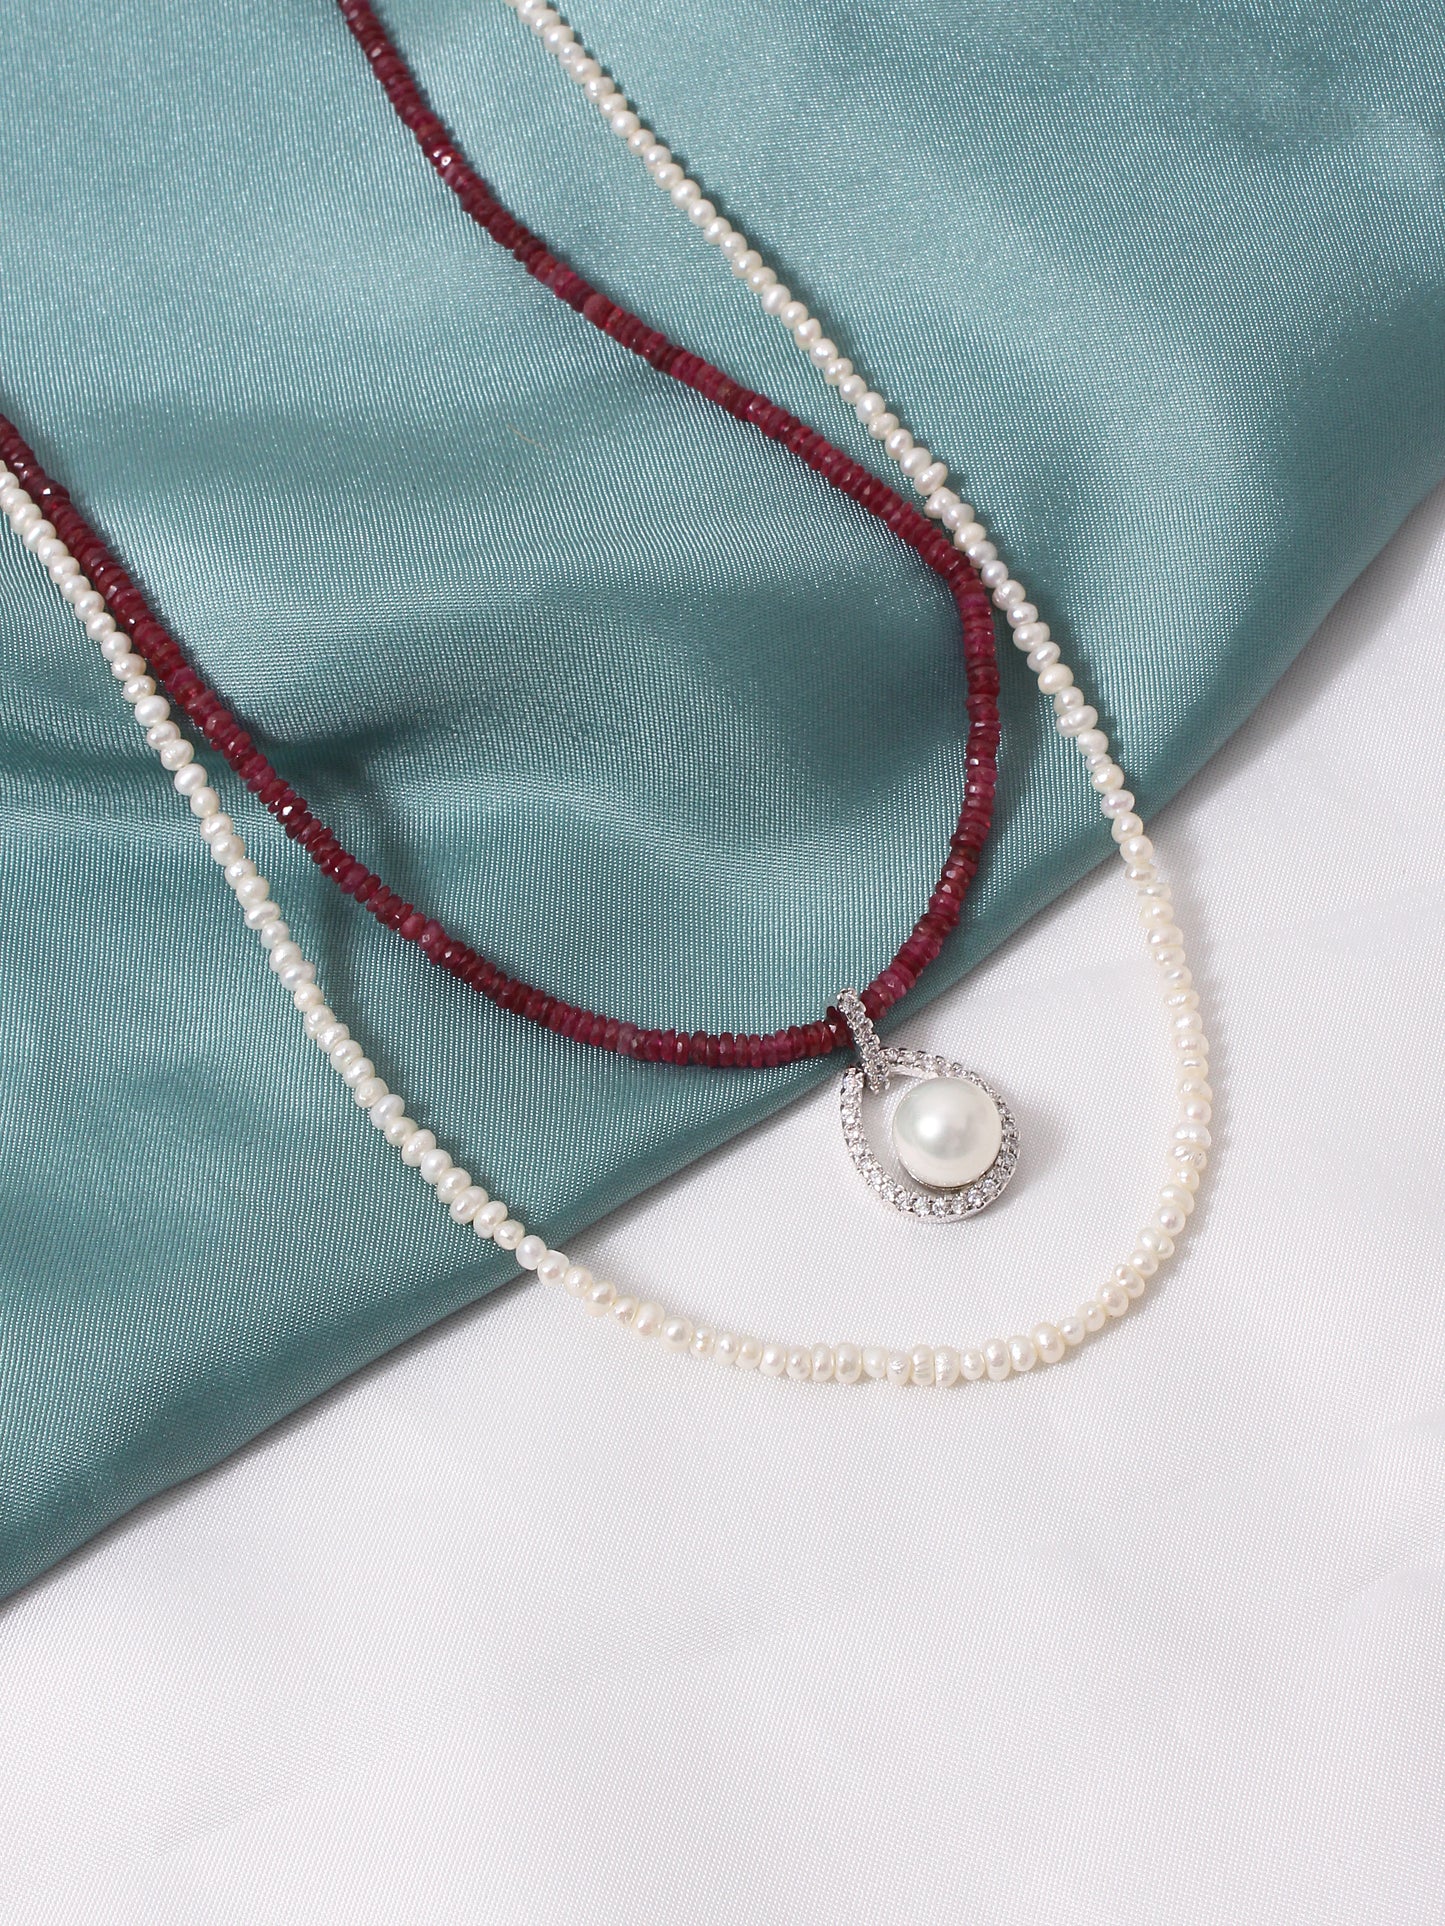 Pearl & Ruby Pendant: Timeless Elegance, Layered Necklace